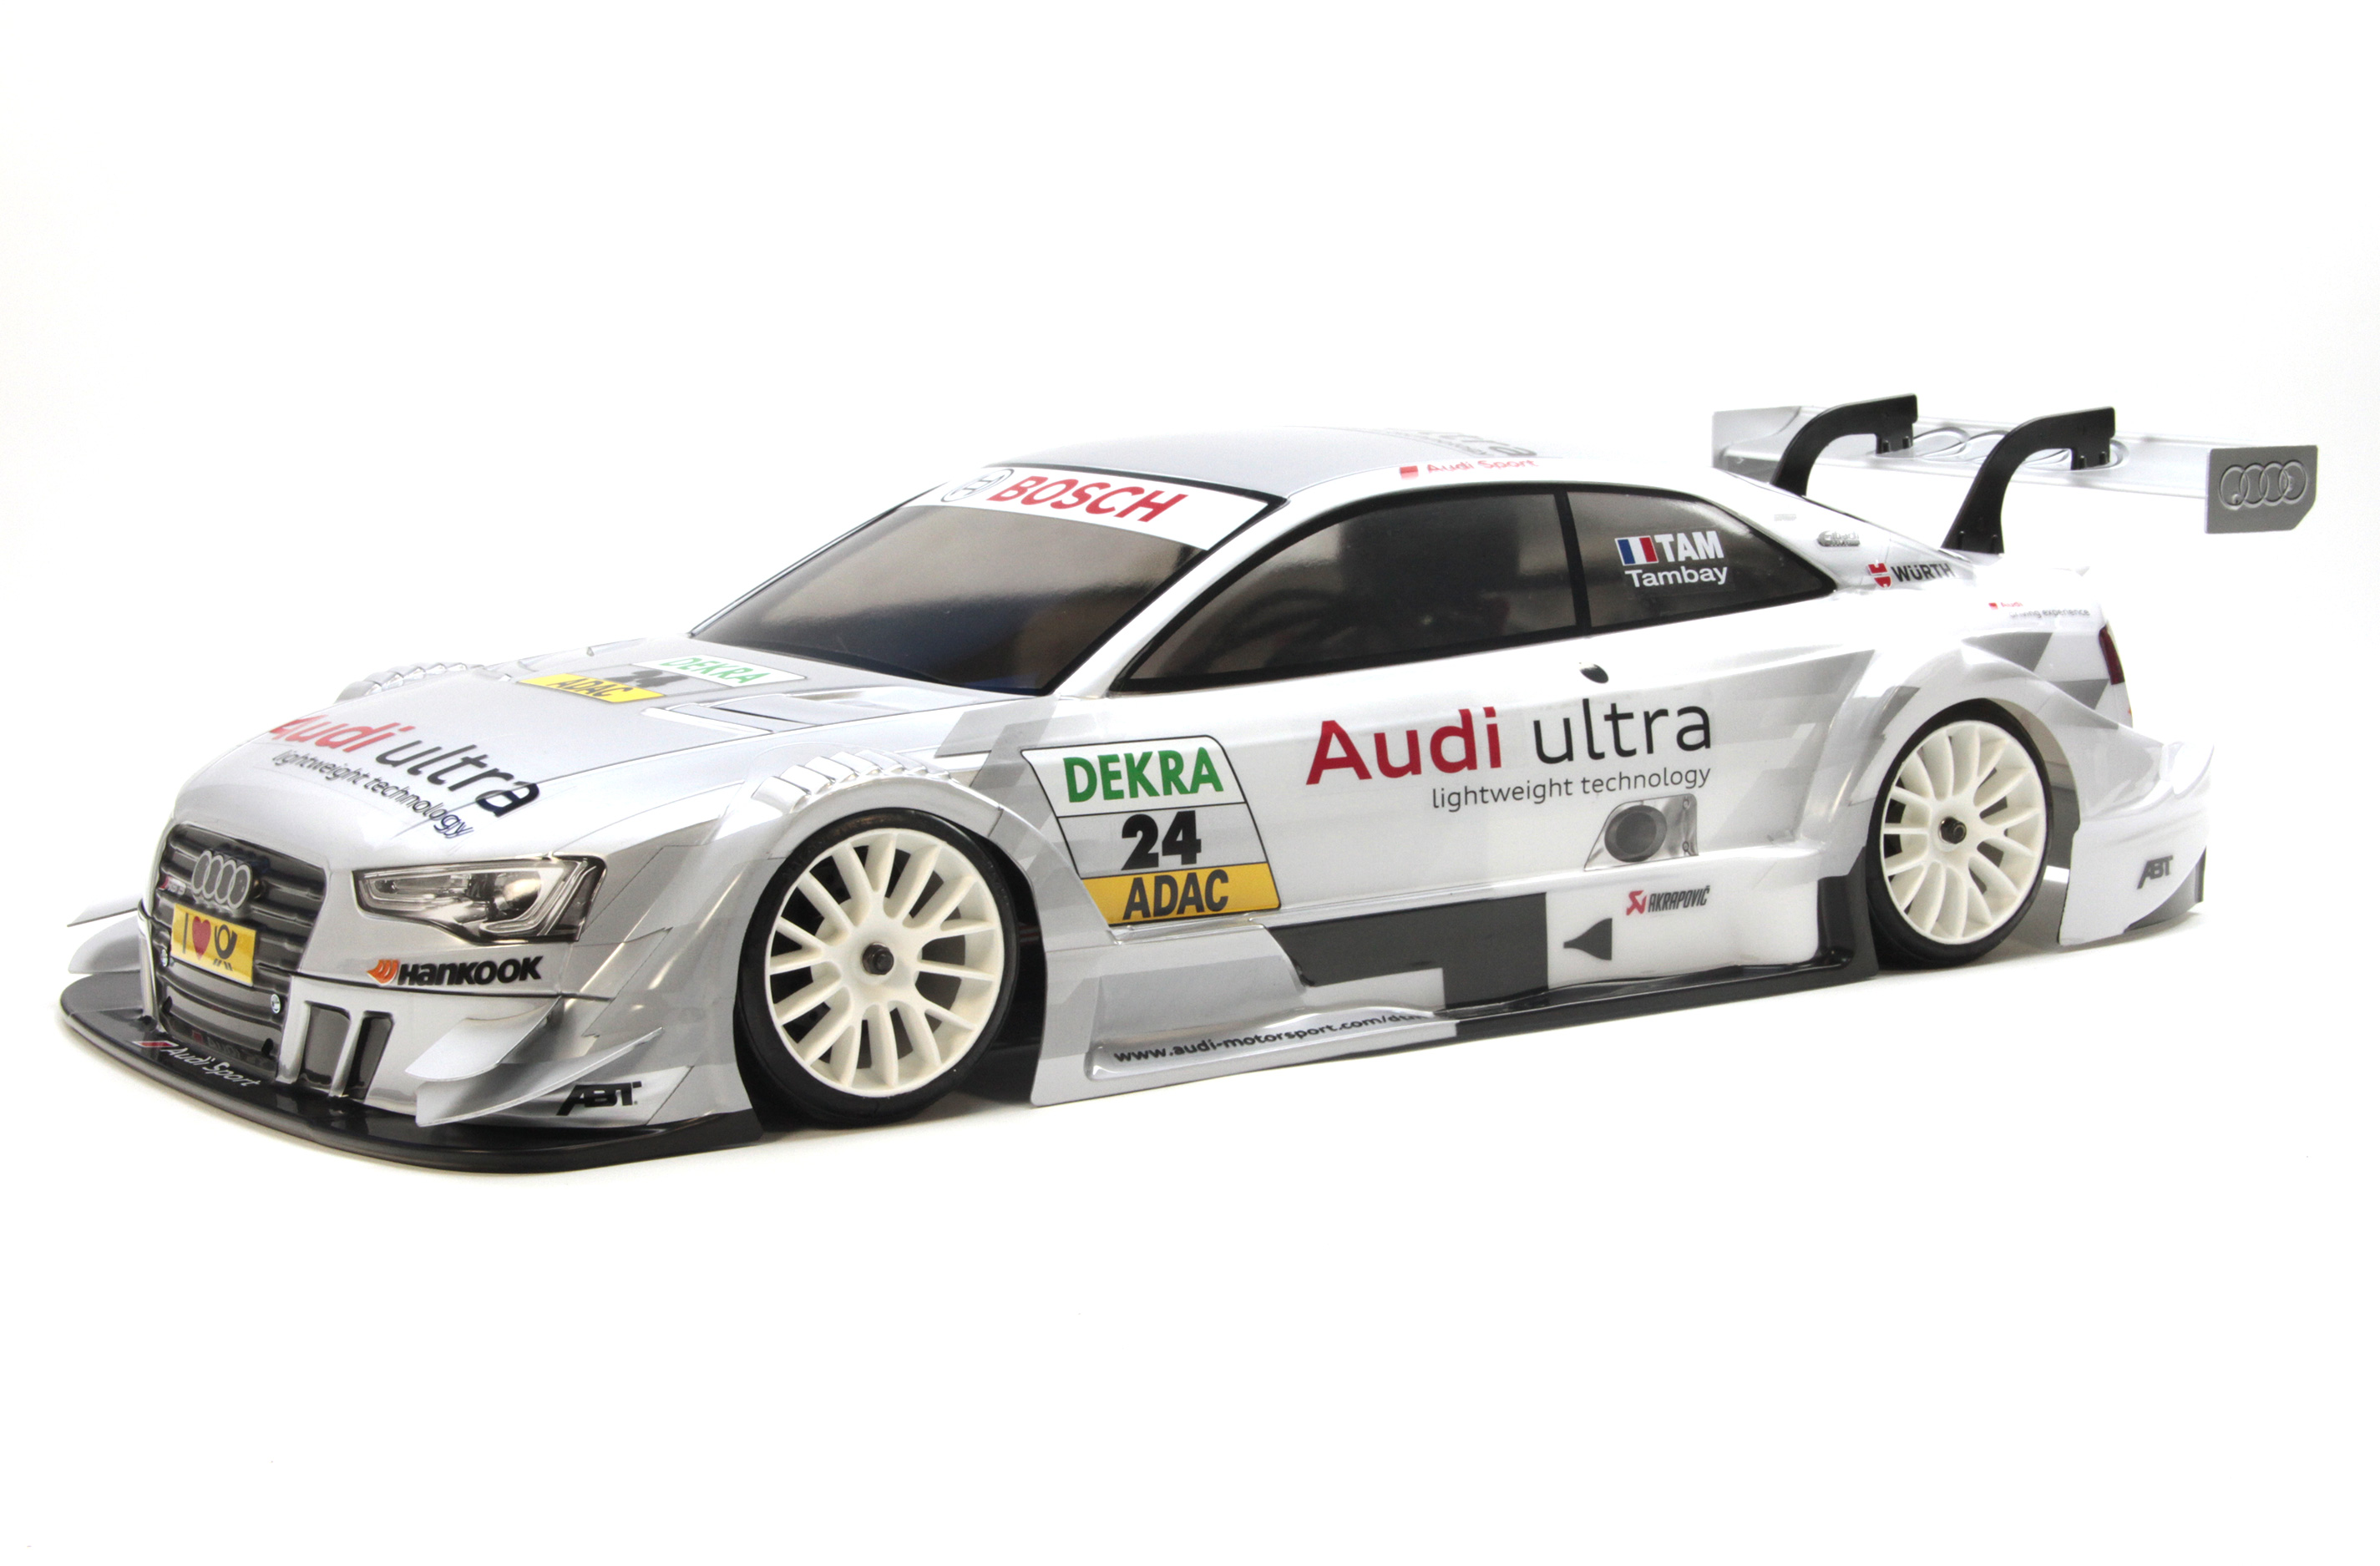 FG Sportsline with Audi RS5 body shell, 23cm³ Engine